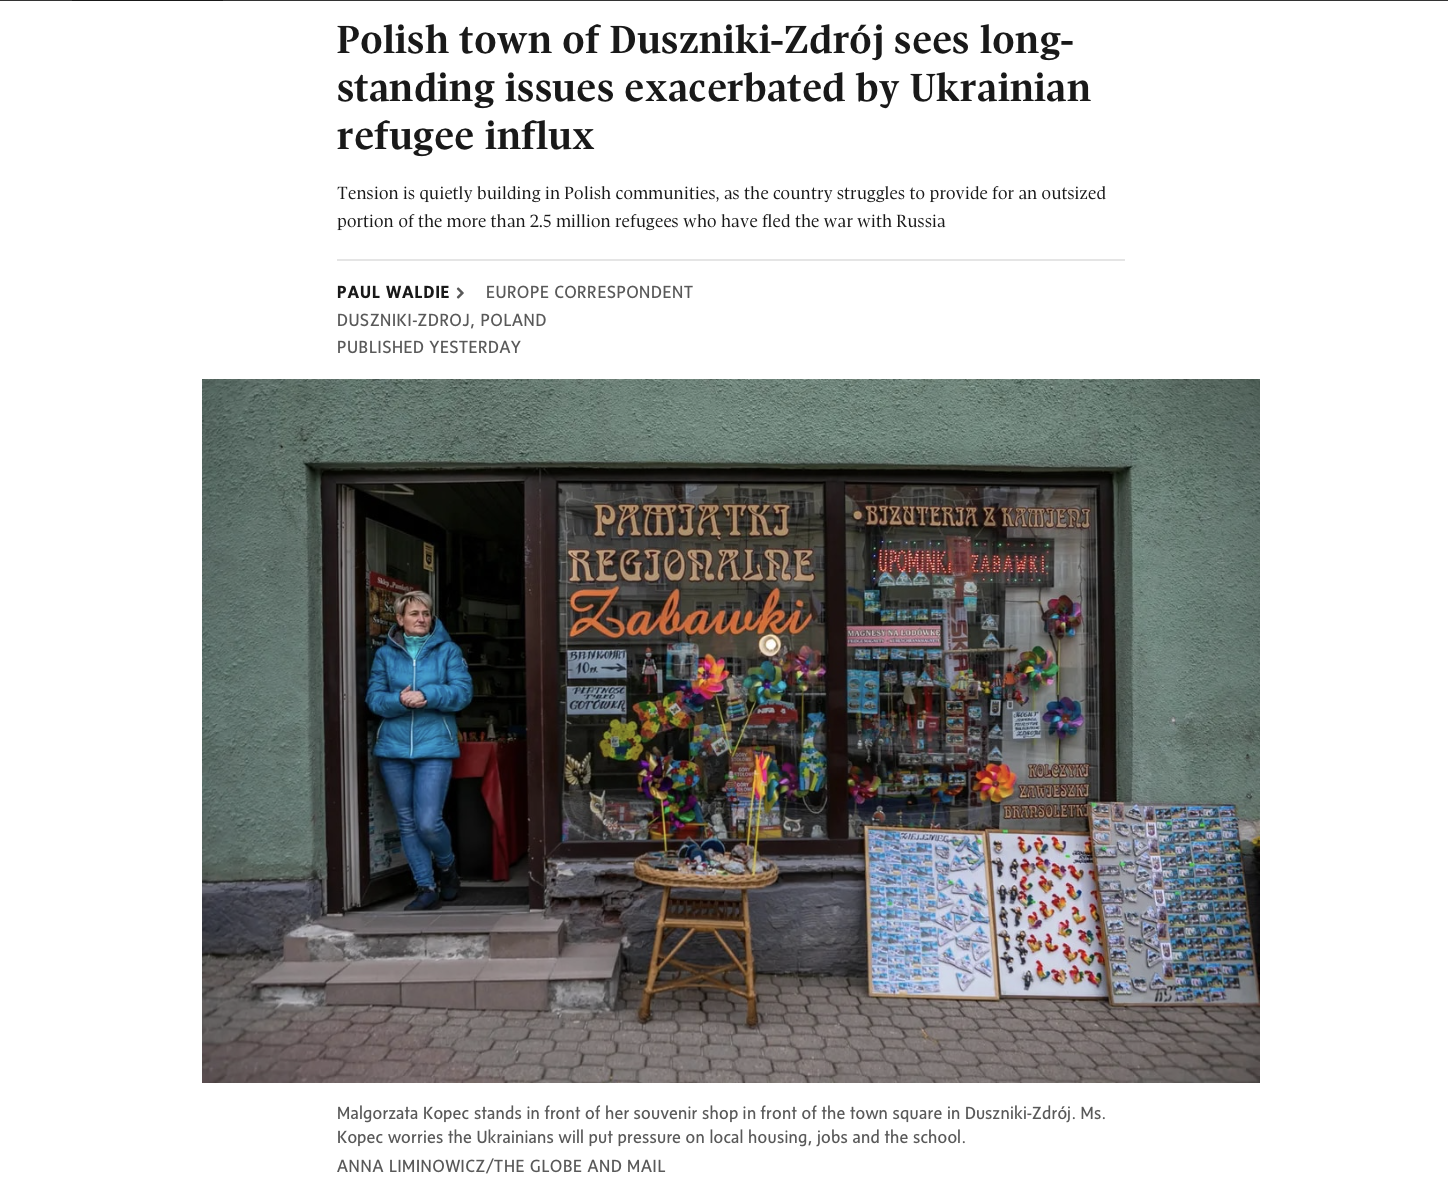 Polish town of Duszniki-Zdrój sees long-standing issues exacerbated by Ukrainian refugee influx